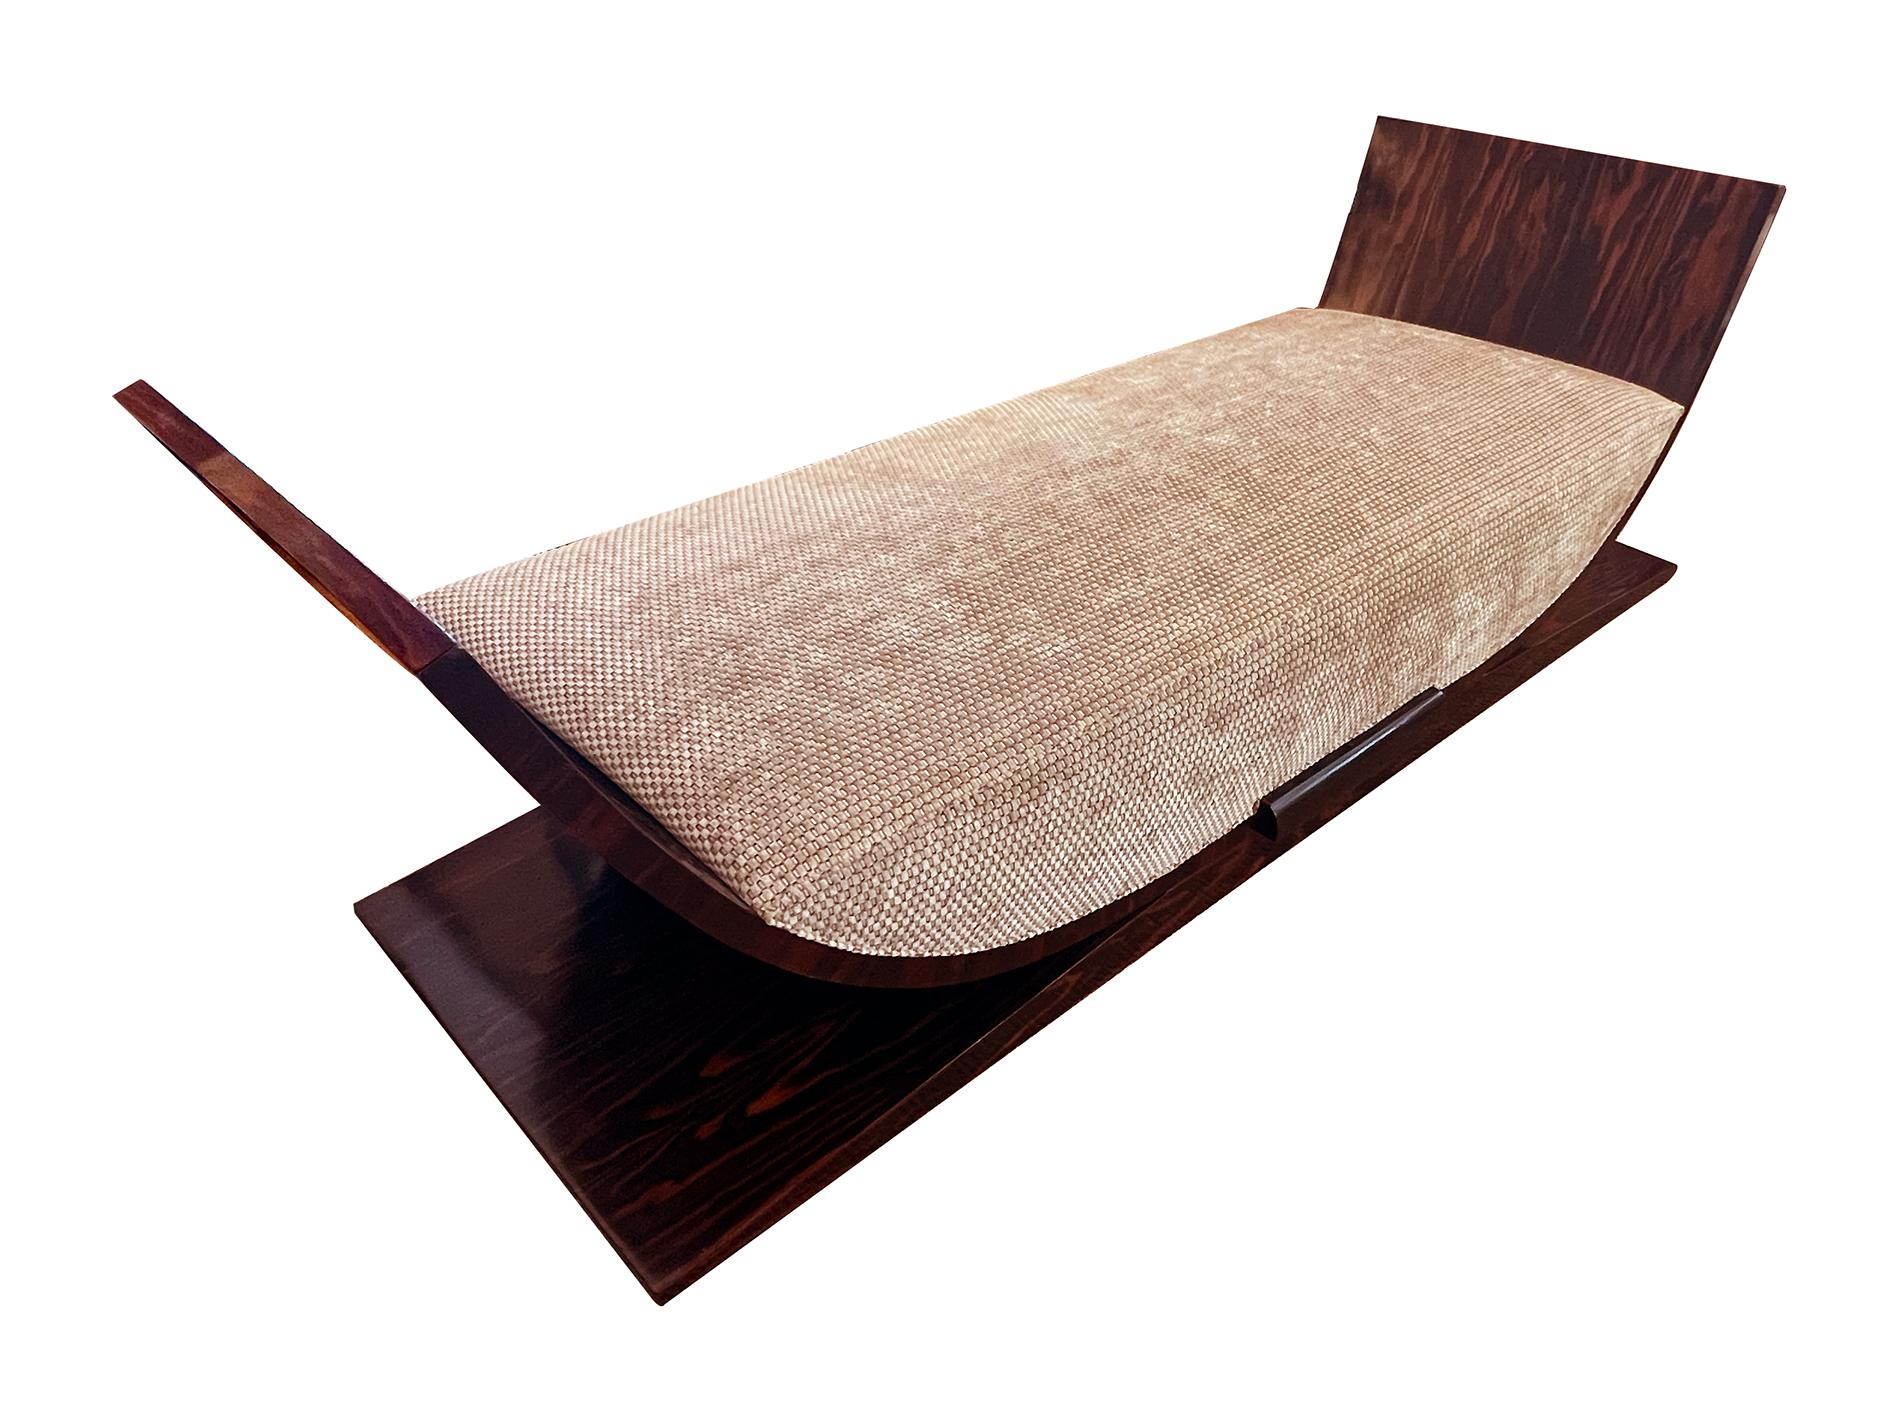 of well-figured macassar veneer with its dark chocolate brown and alternating irregular caramel color striations; the shapely daybed with dramatic incurved ends flanking a deep upholstered seat; raised on a sloping rectangular plinth